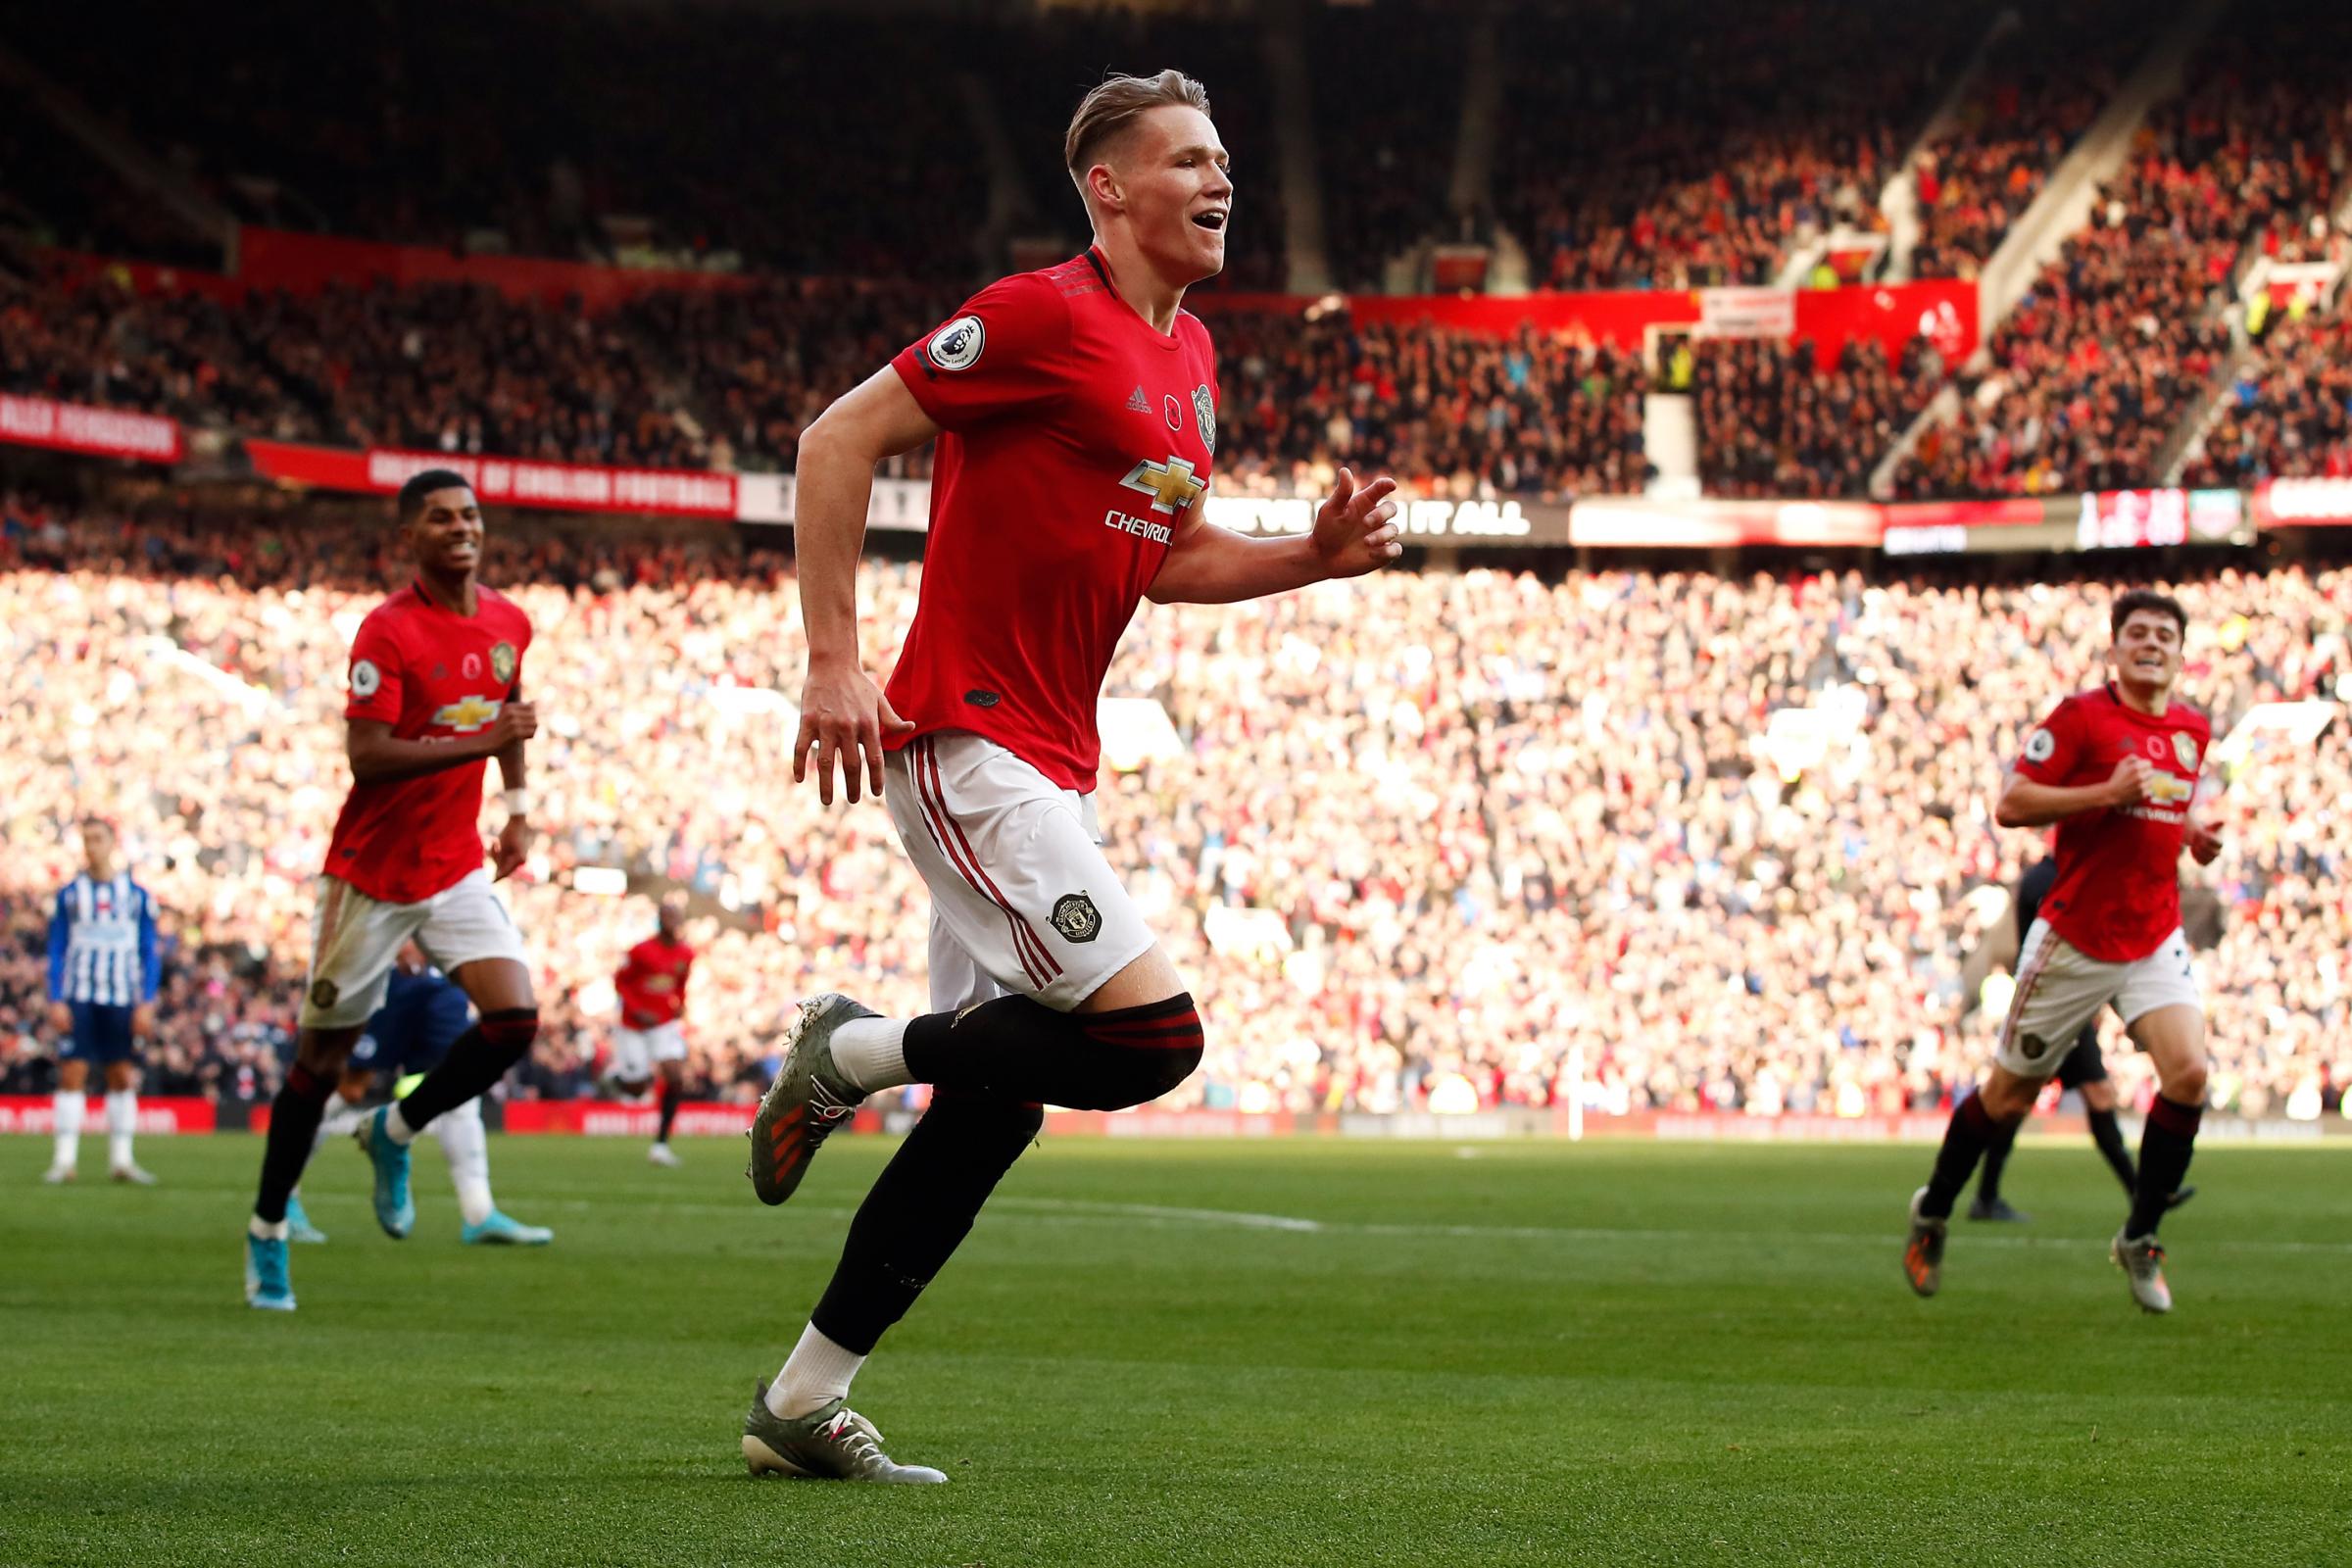 Scott McTominay urges Manchester United team-mates to continue stepping up - Bury Times